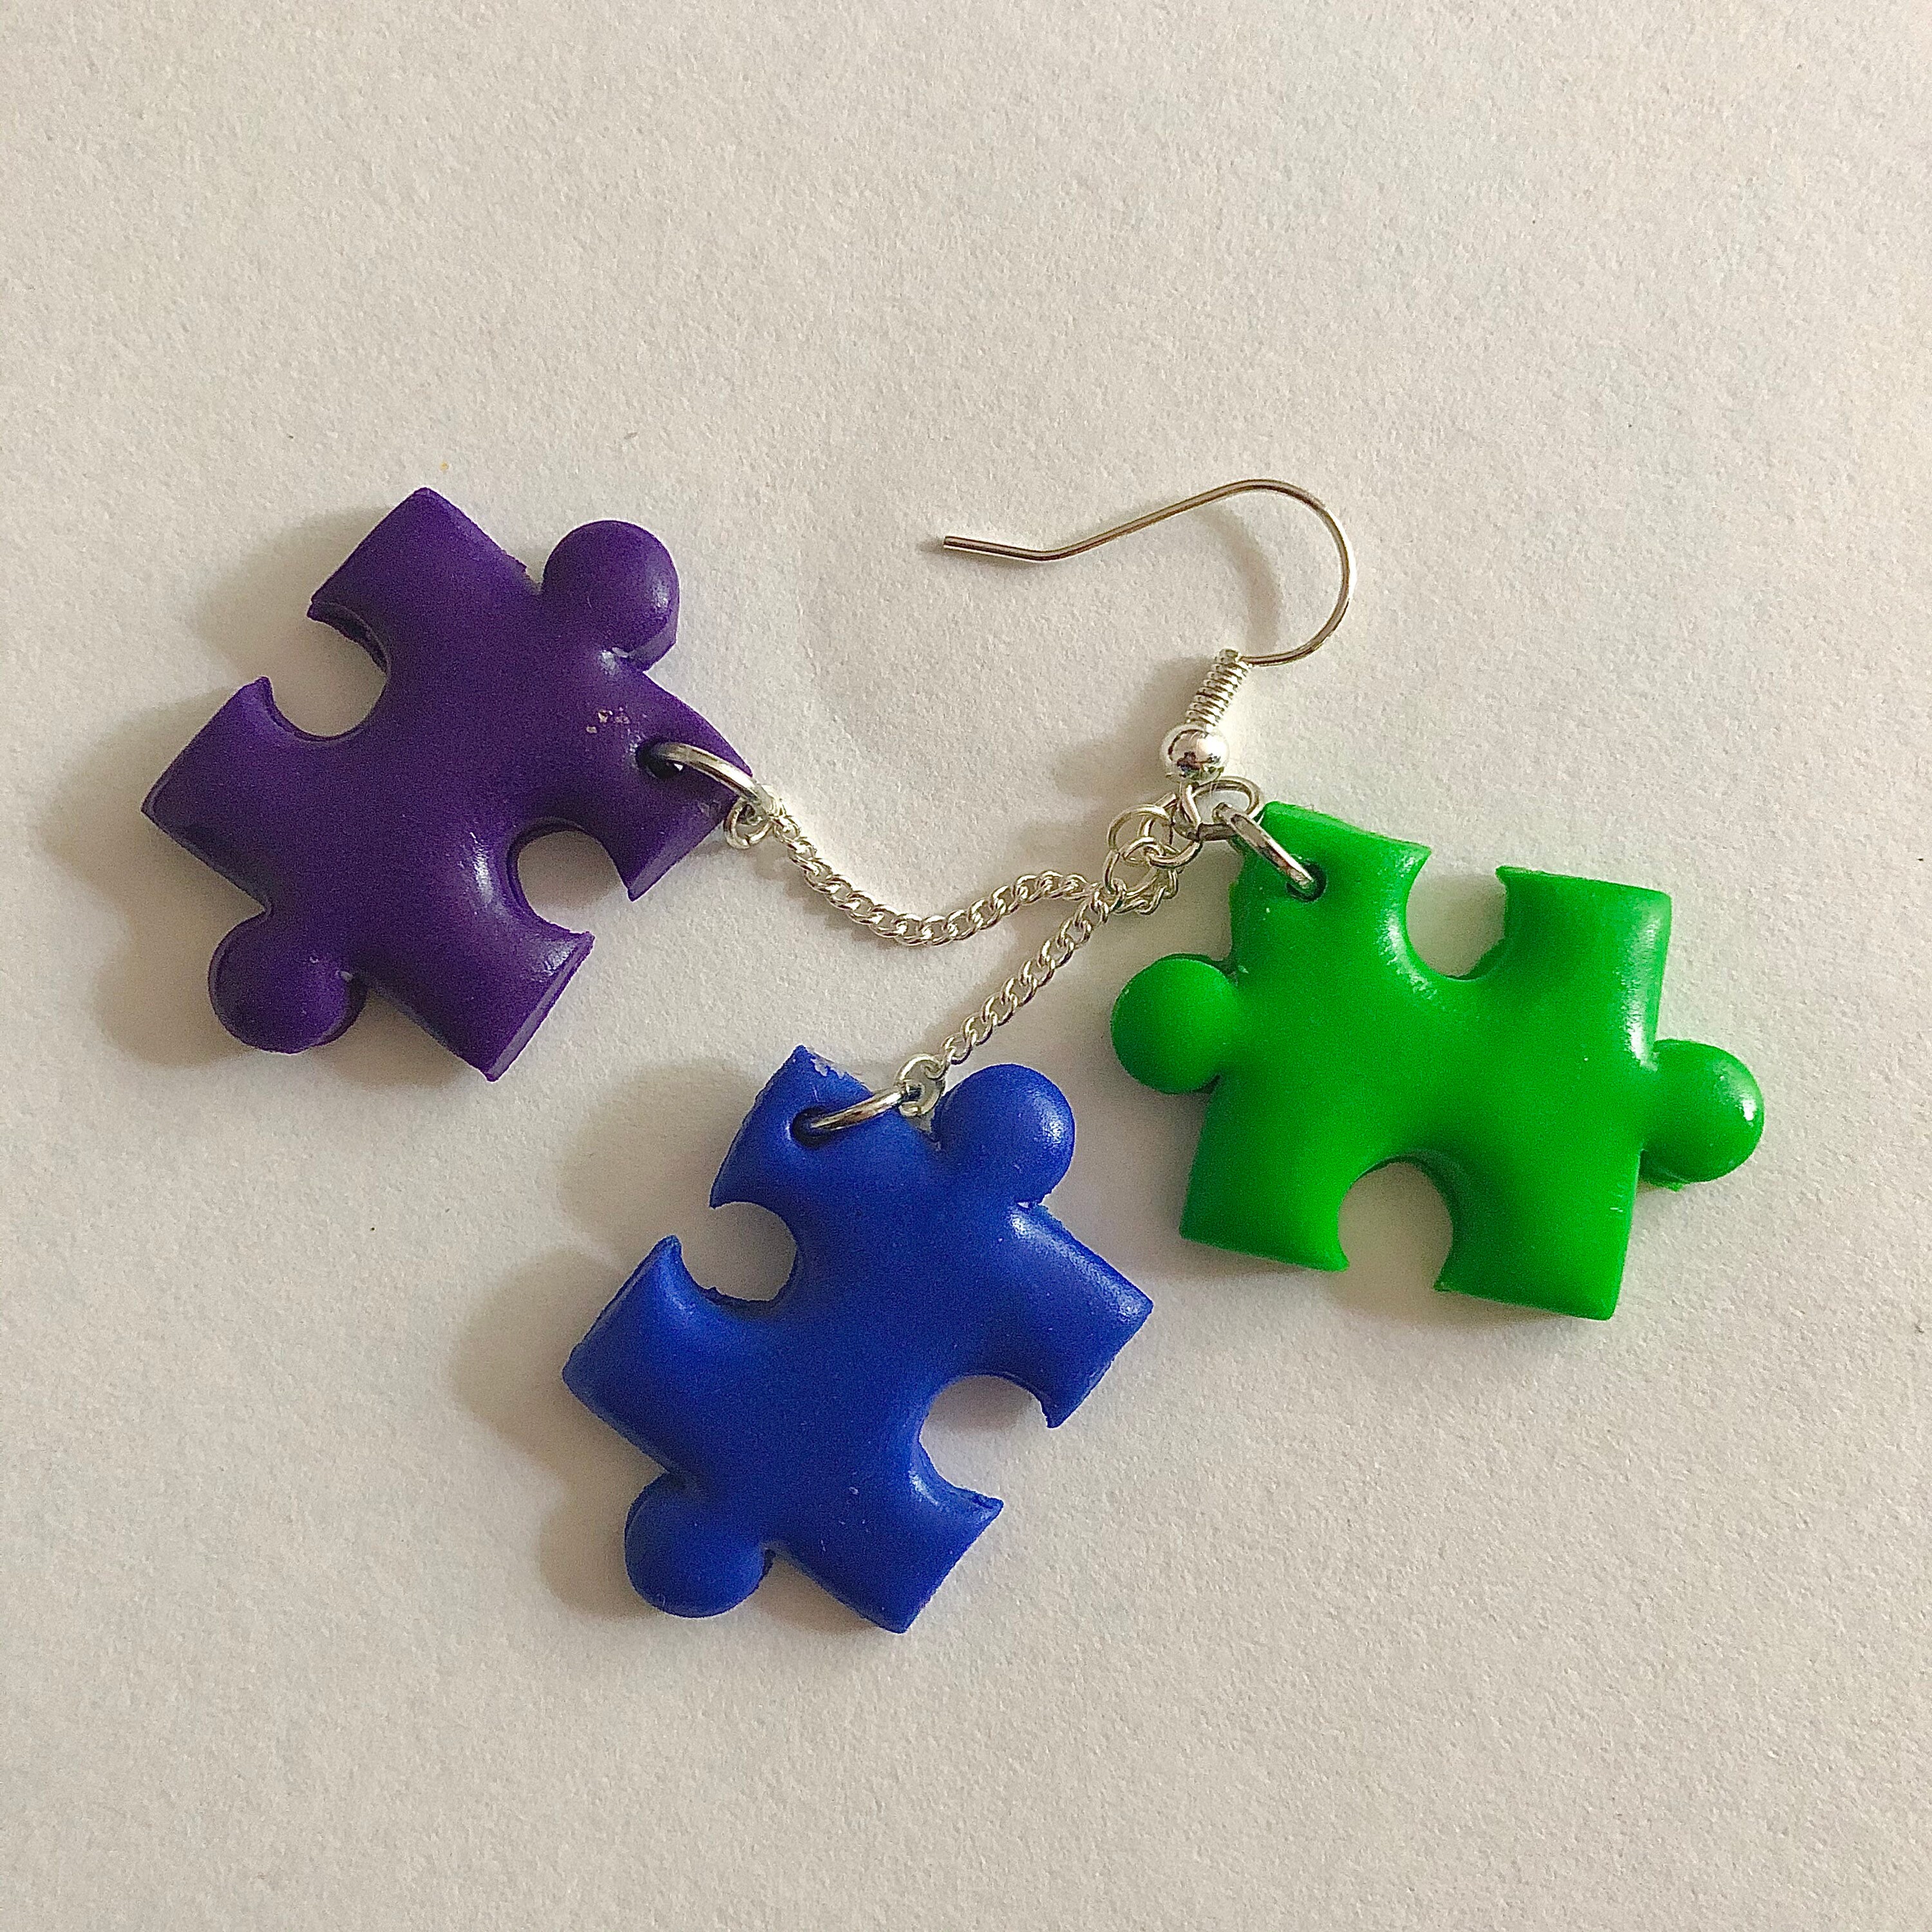 Mini Puzzle Pieces Earrings - Etsy